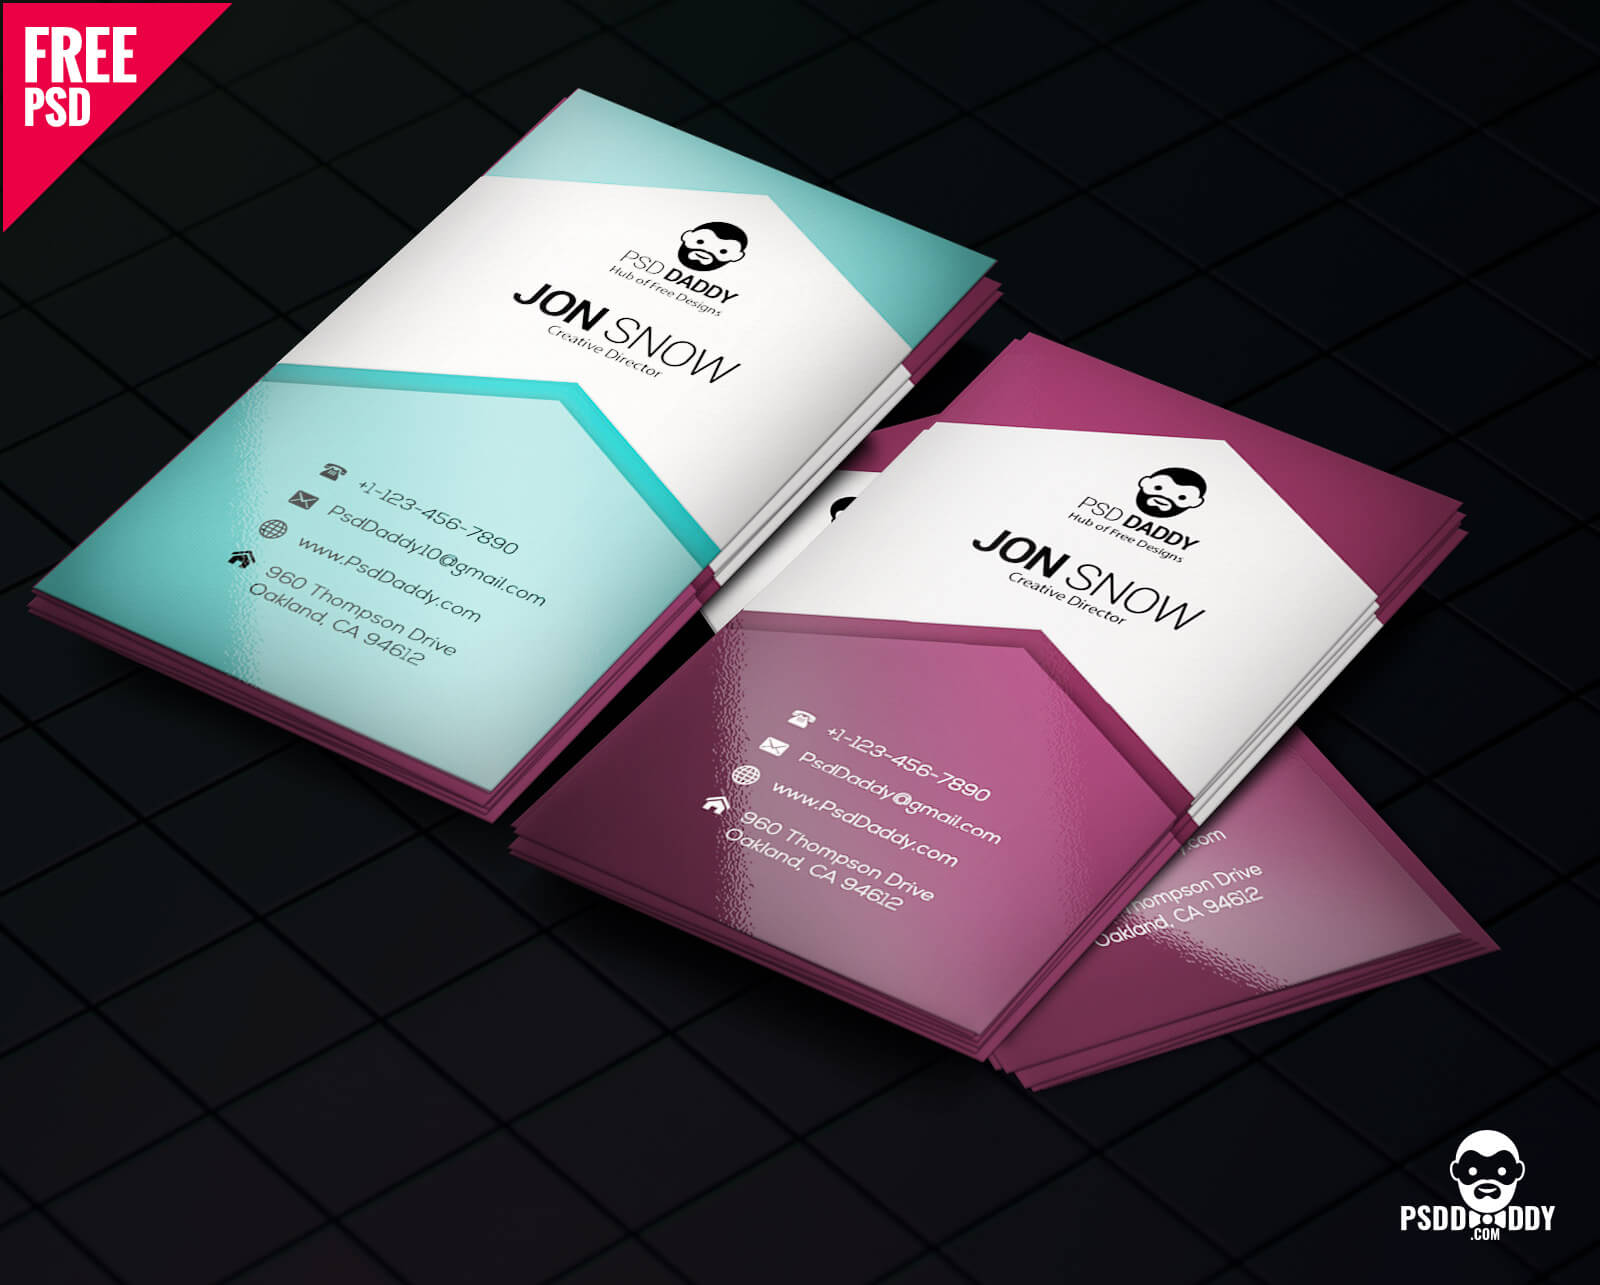 Download]Creative Business Card Psd Free | Psddaddy Pertaining To Visiting Card Psd Template Free Download